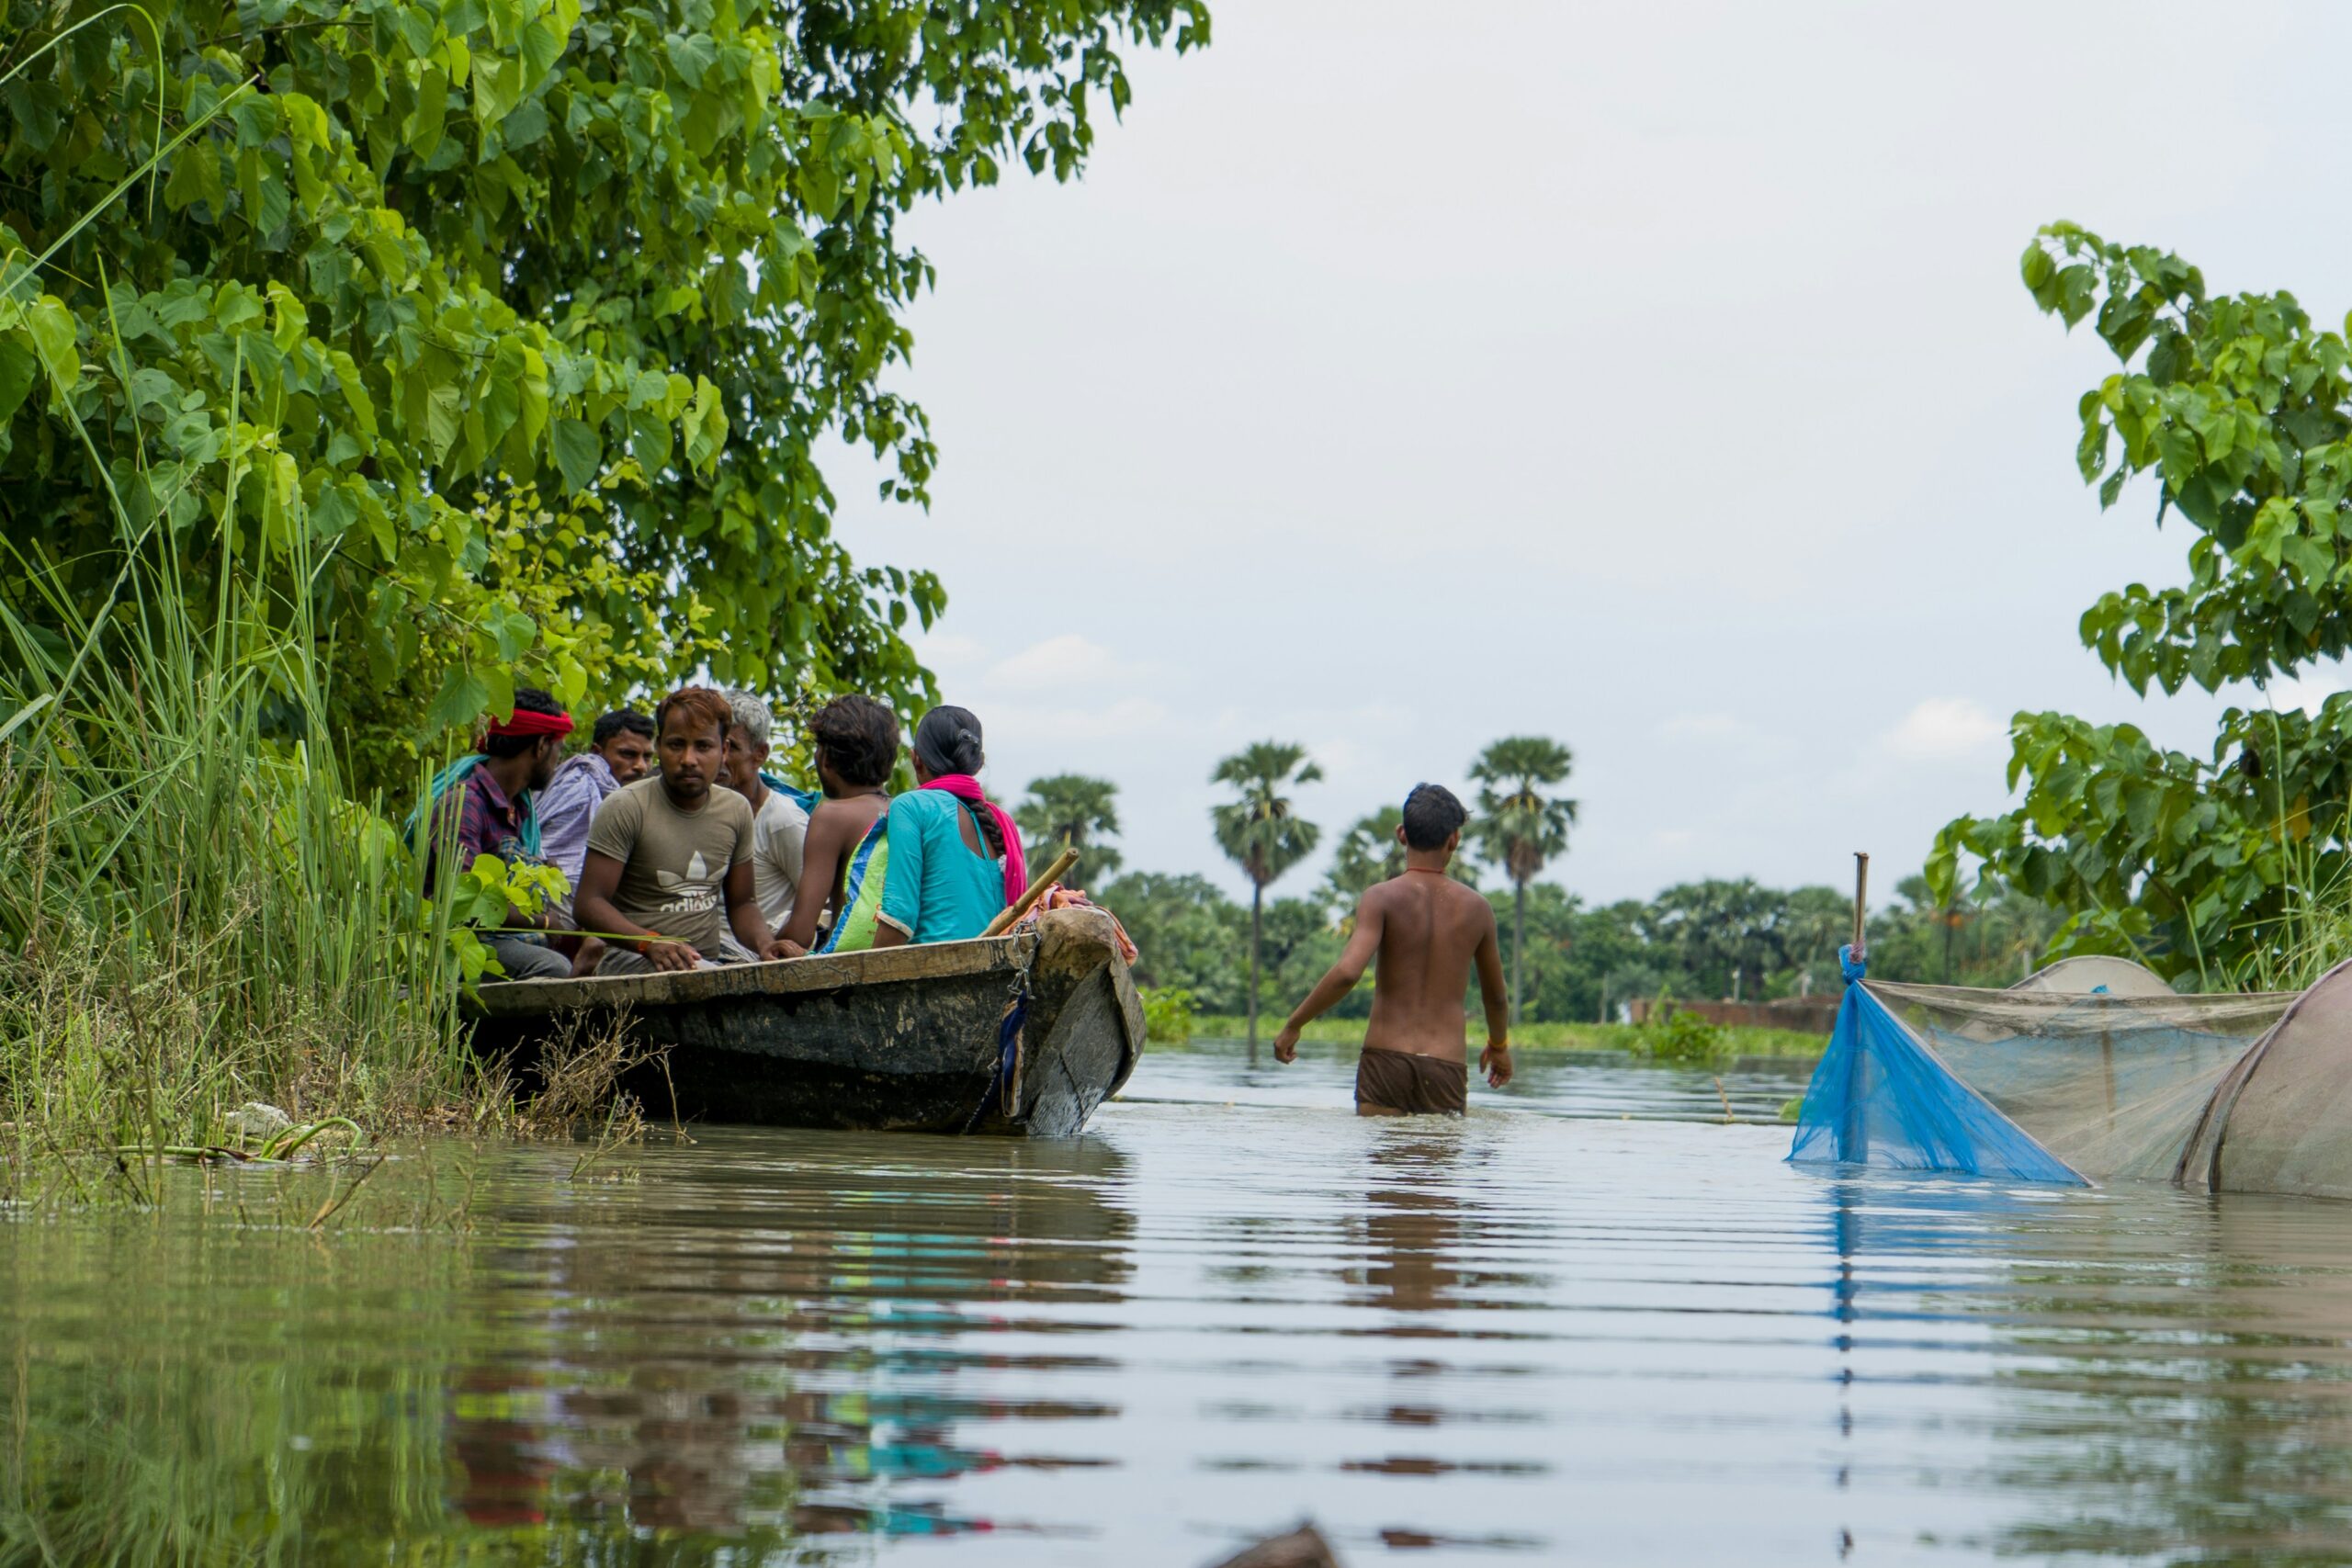 Children on a boat in a flooded area